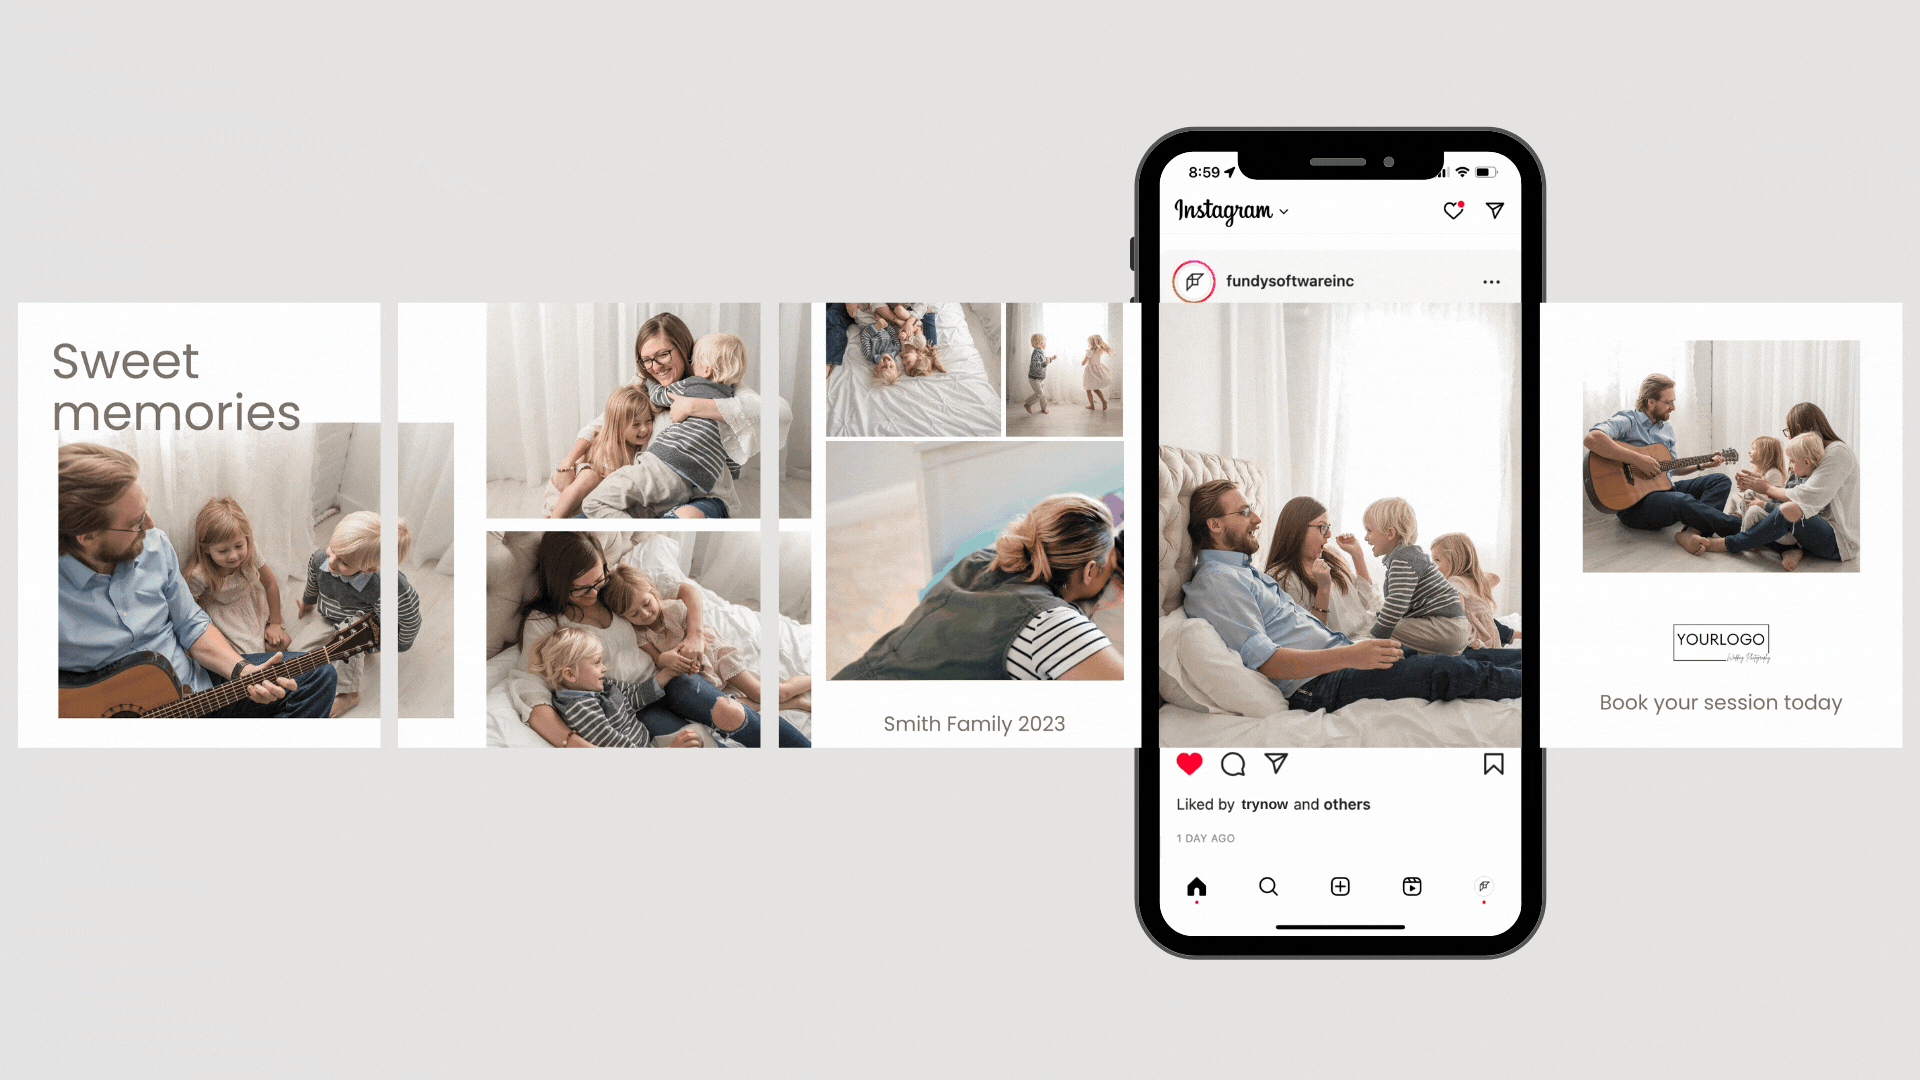 an Instagram carousel with 5 panels, most panels are still images but panel 3 is a combination of still images and a video. The images are of a family with two children